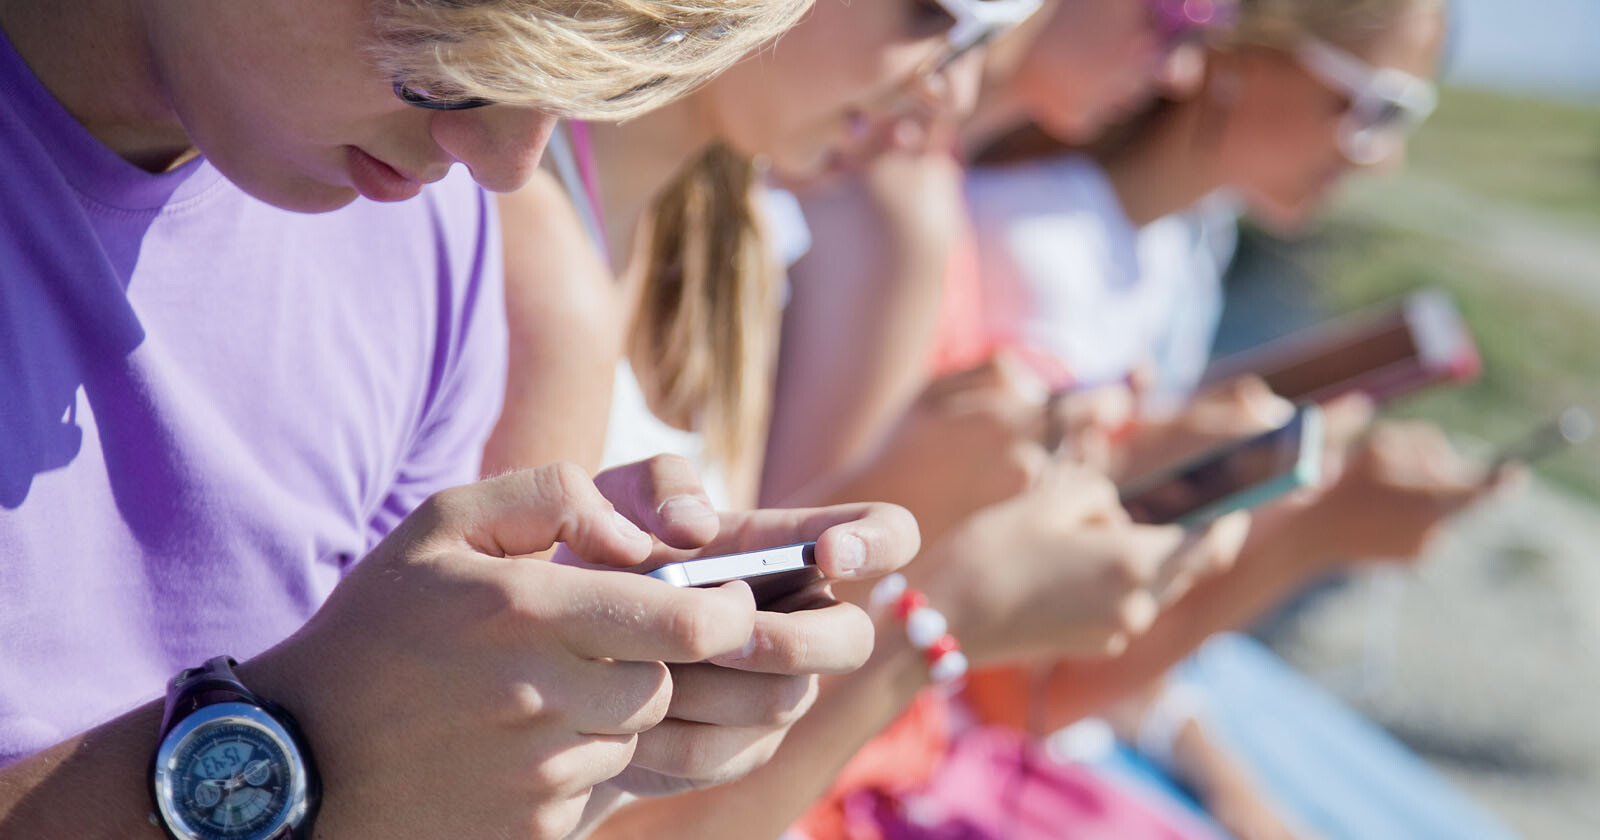 New Texas Law Will Require Kids Get Parental Consent to Use Social Media